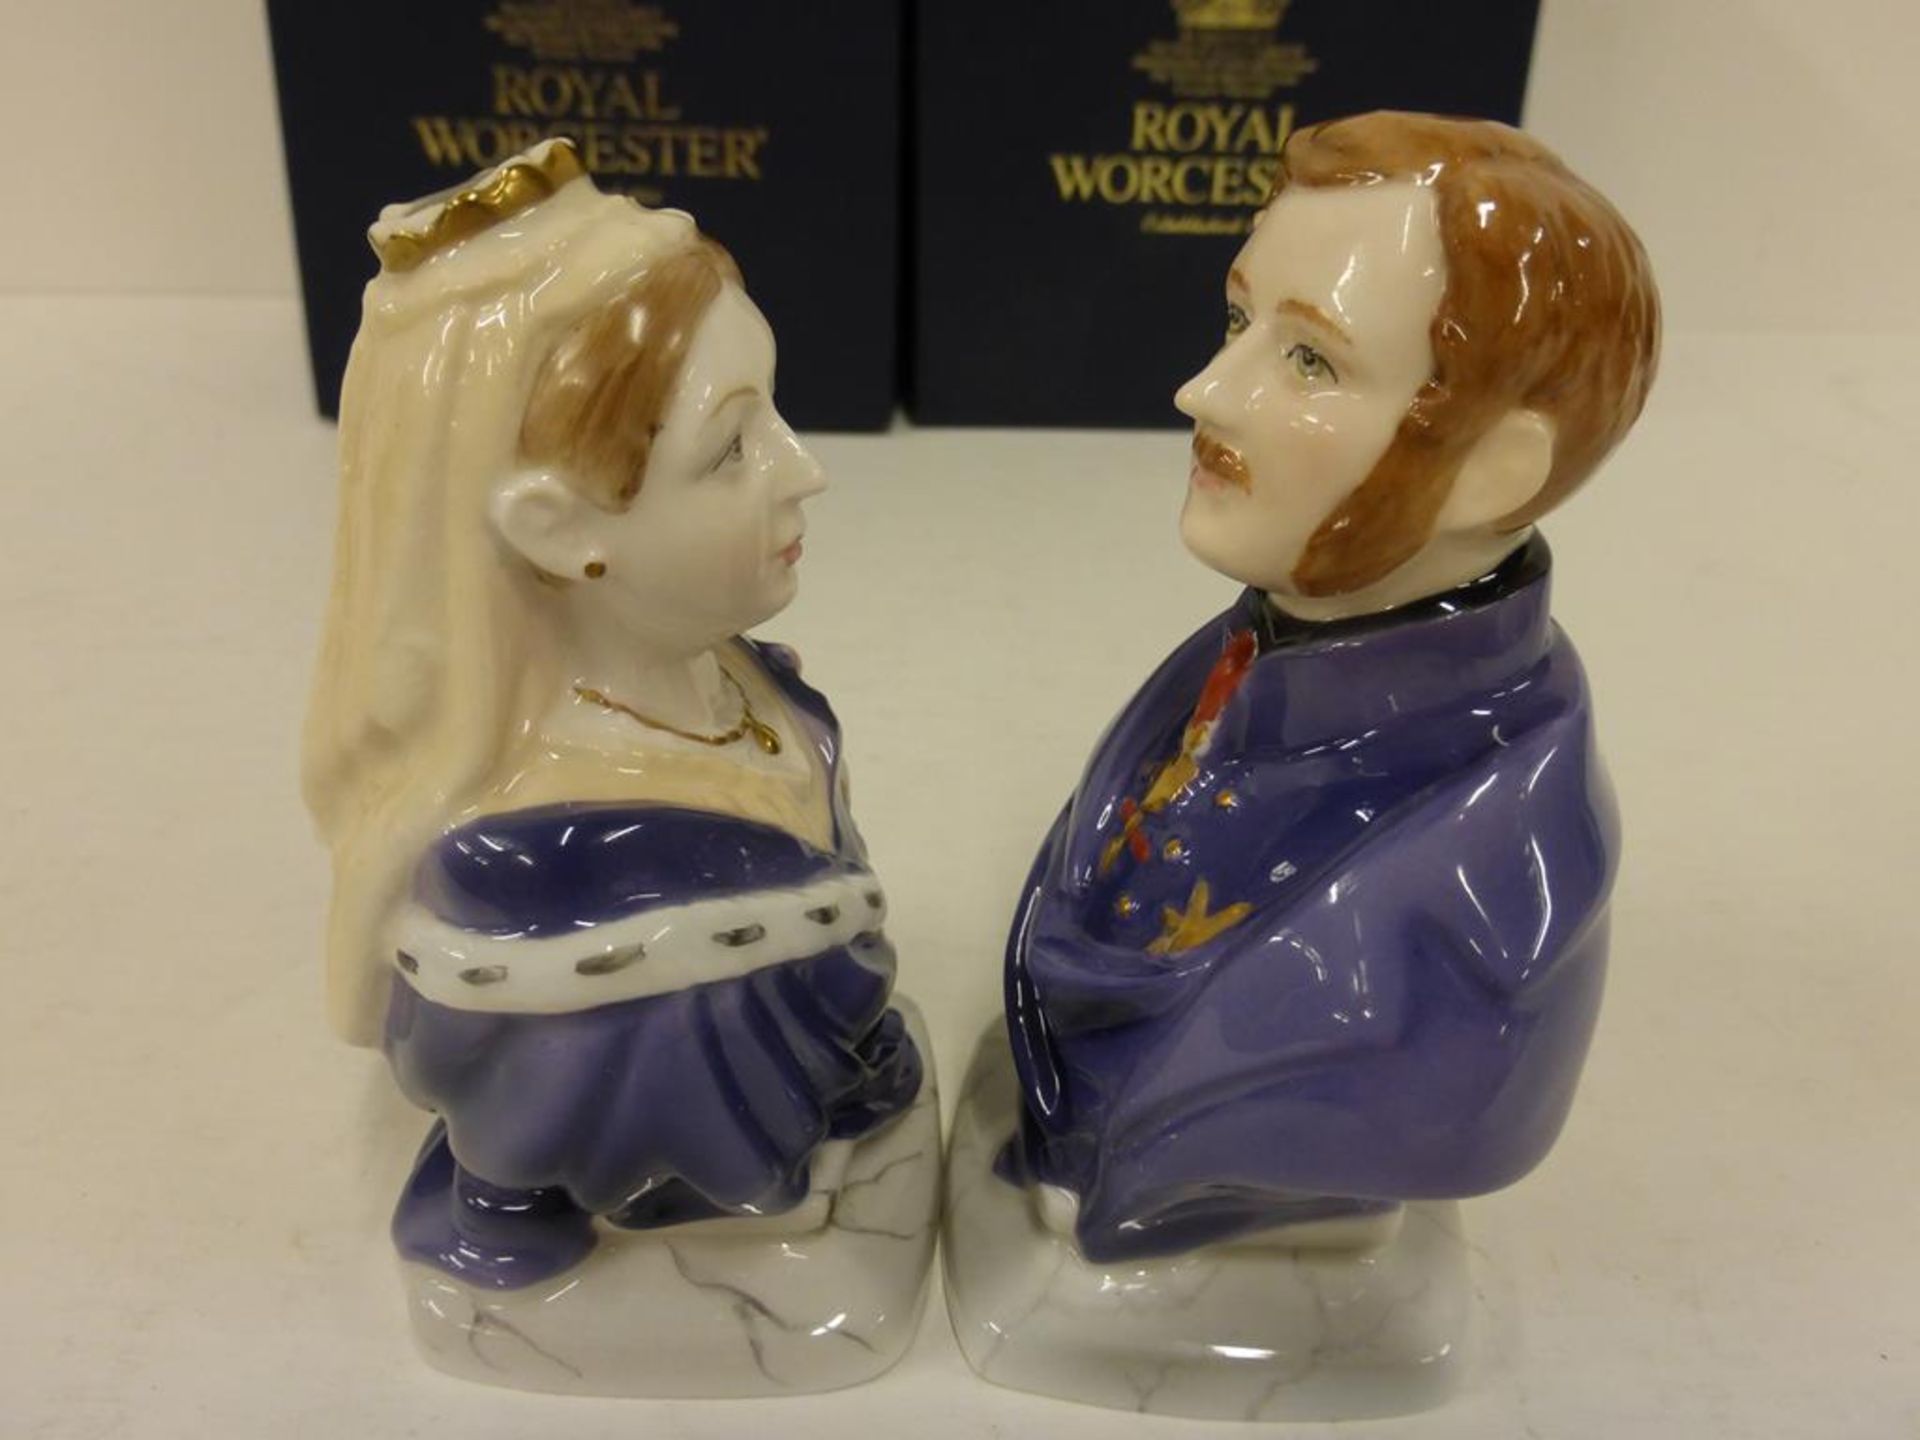 Two Royal Worcester Candle Snuffers - Queen Victoria and Prince Albert. Limited Edition of 500. - Image 6 of 8